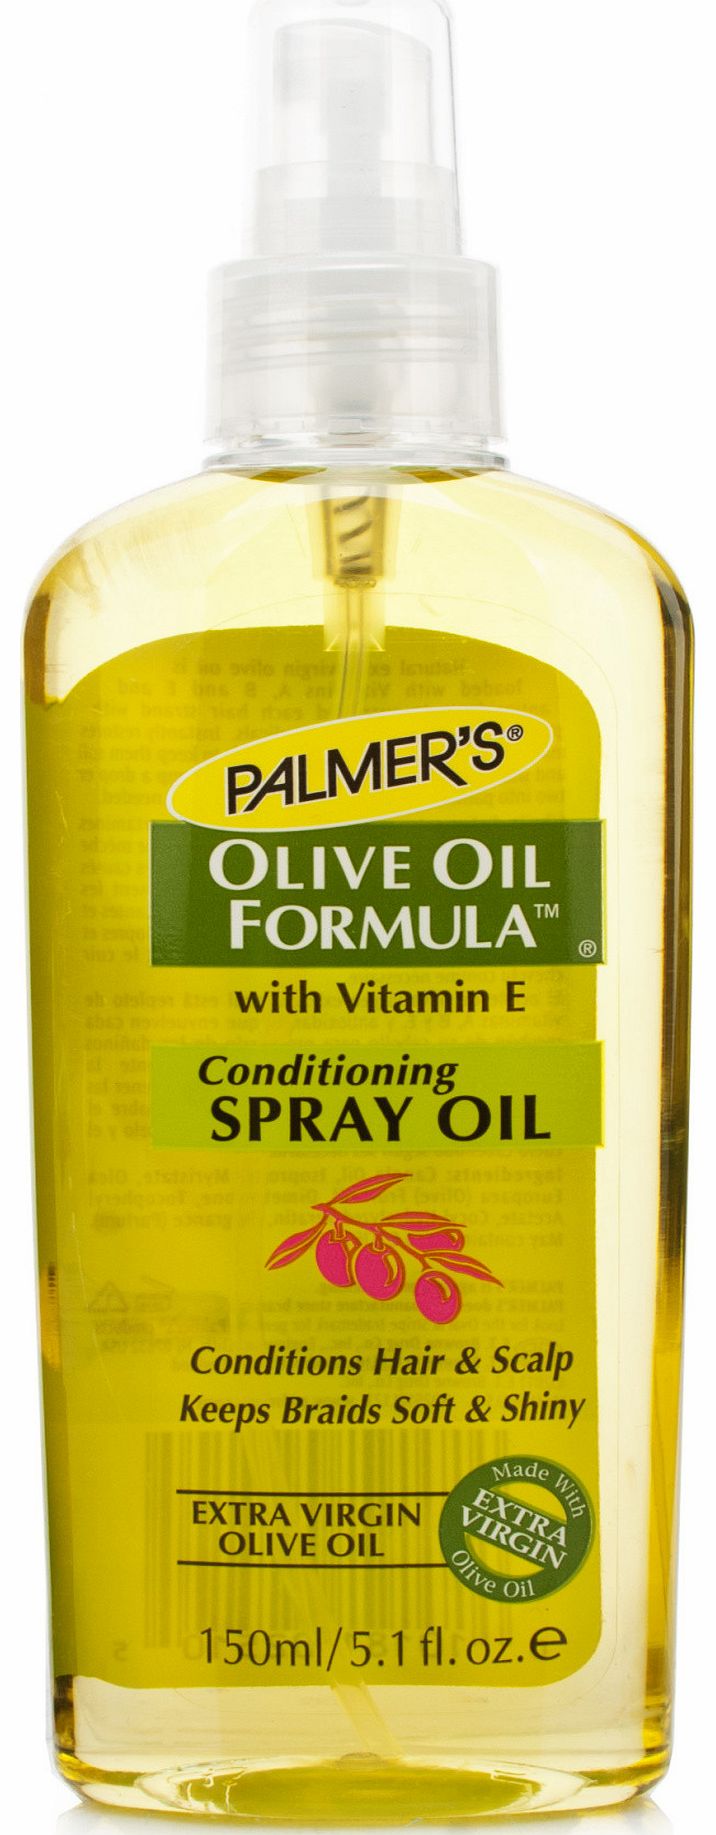 Palmers Olive Oil Hair & Scalp Conditioner Spray